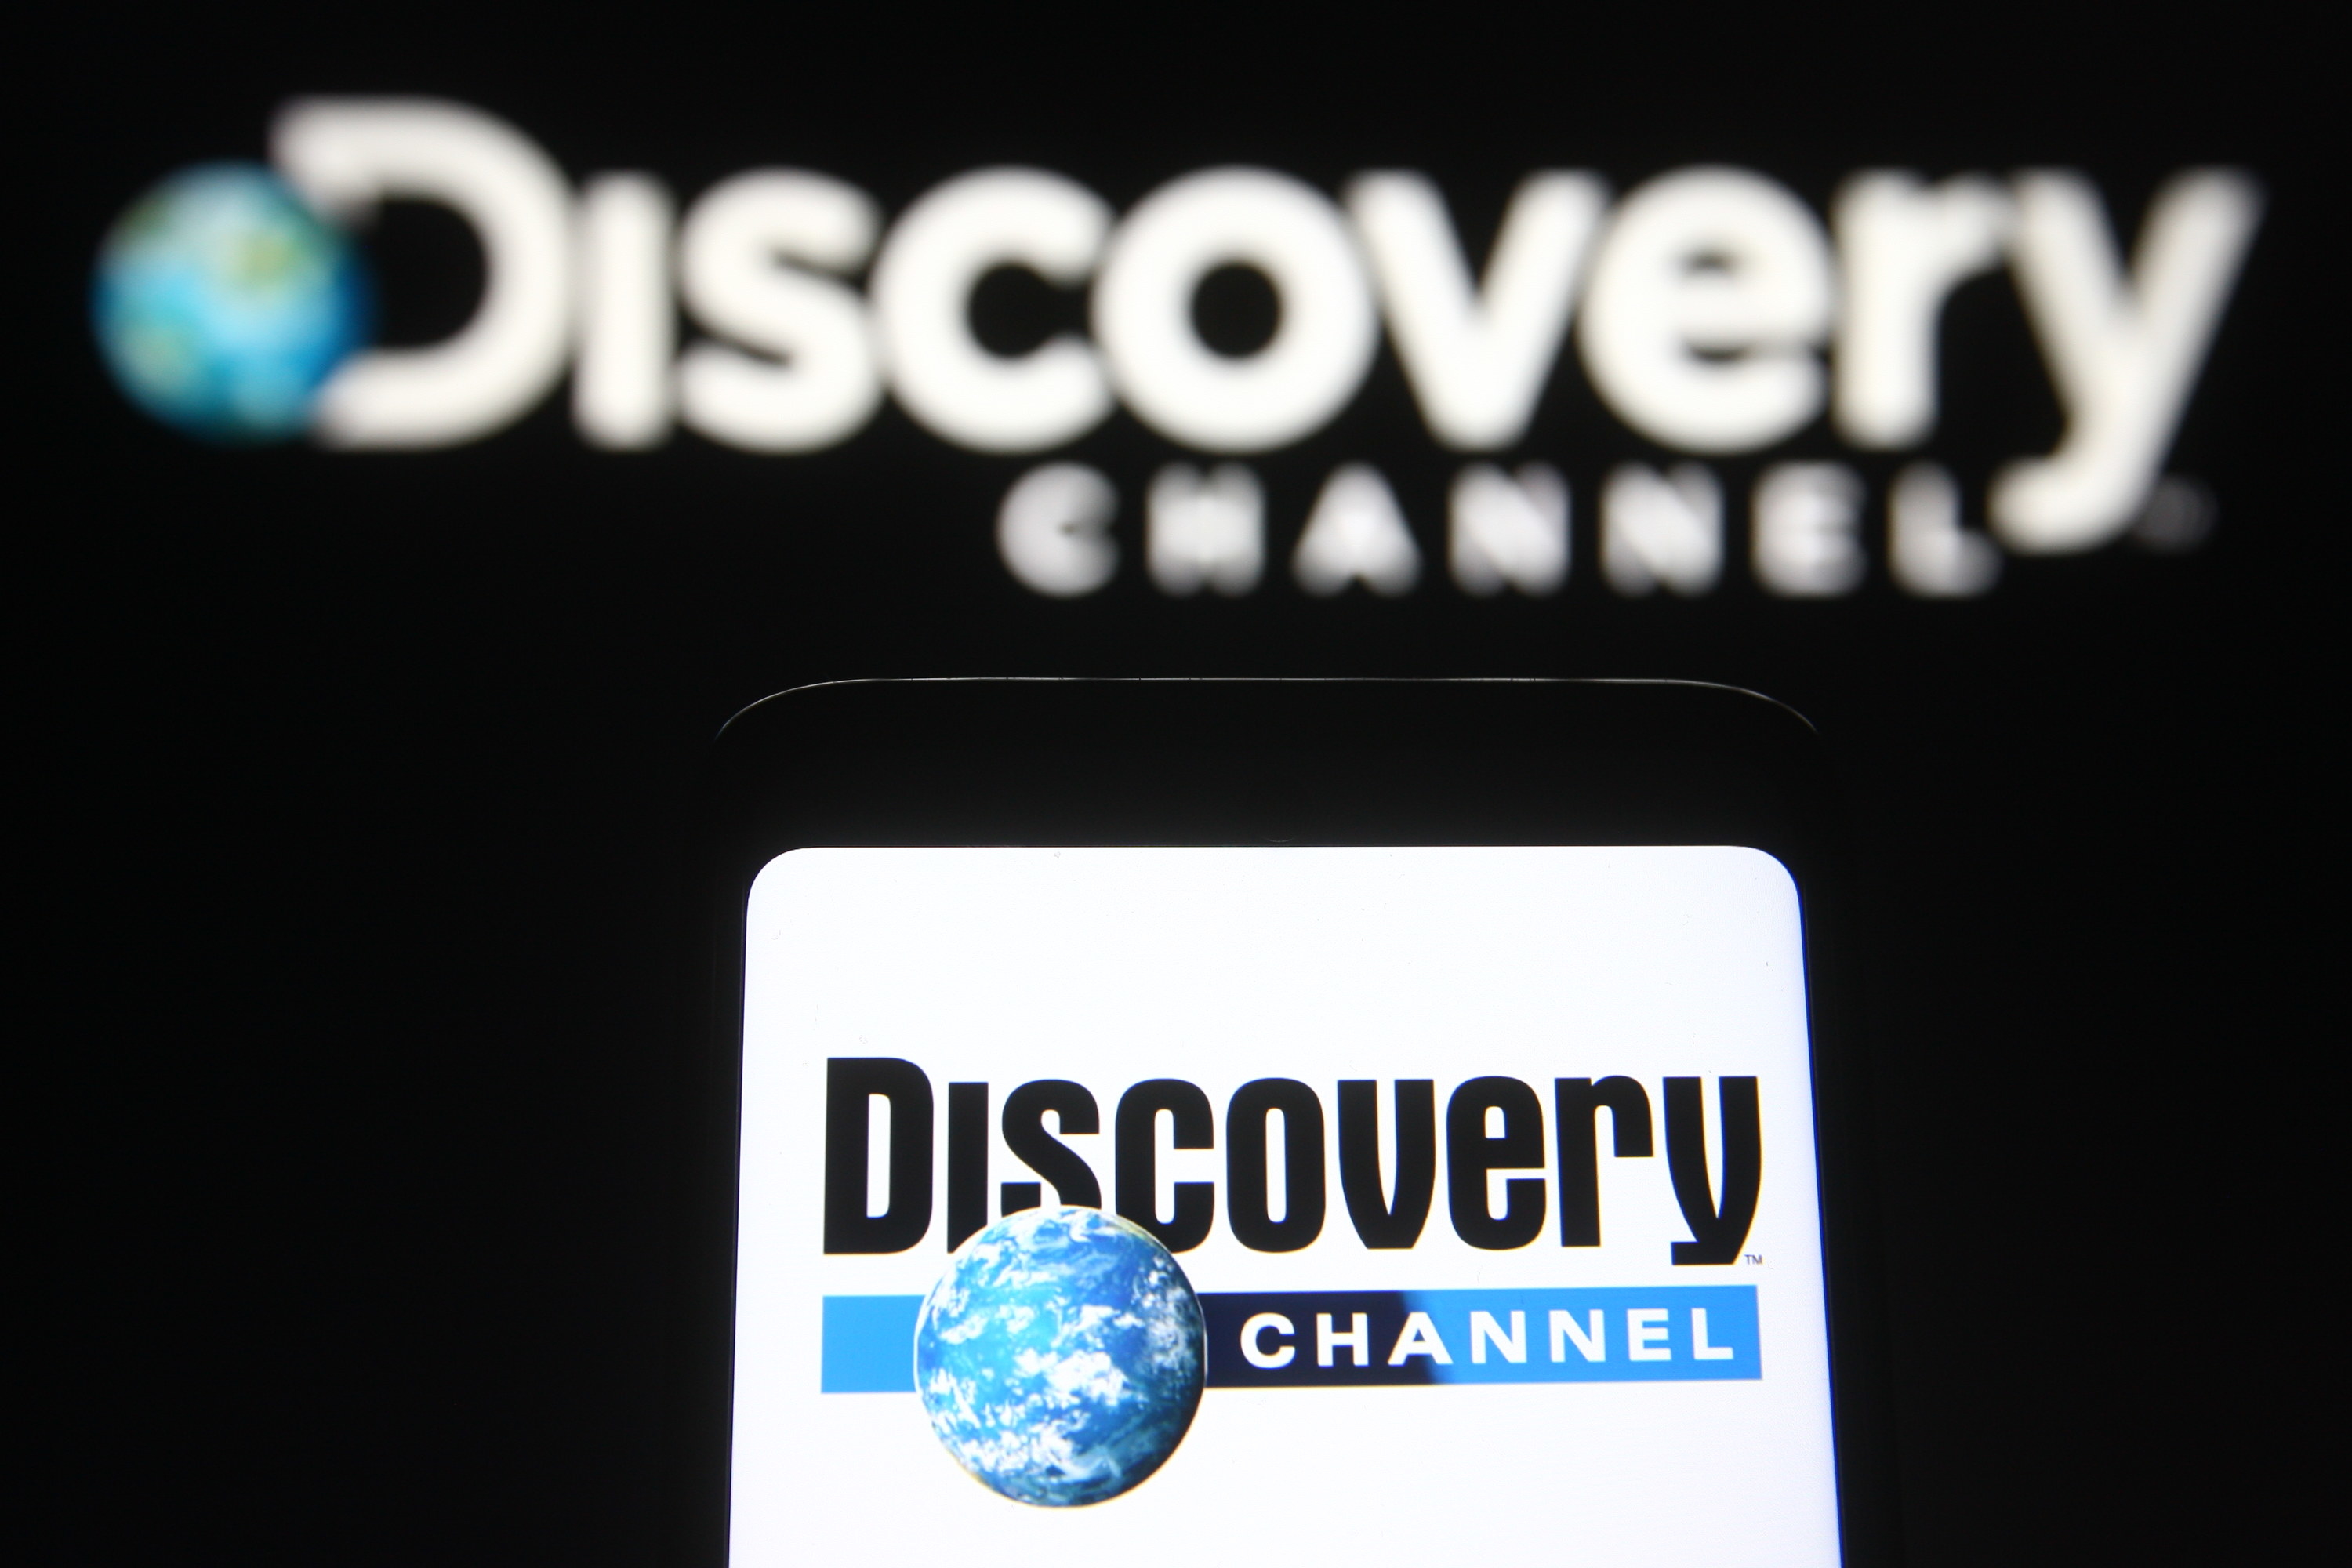 The Discovery Channel logo shown on a smartphone and a PC screen